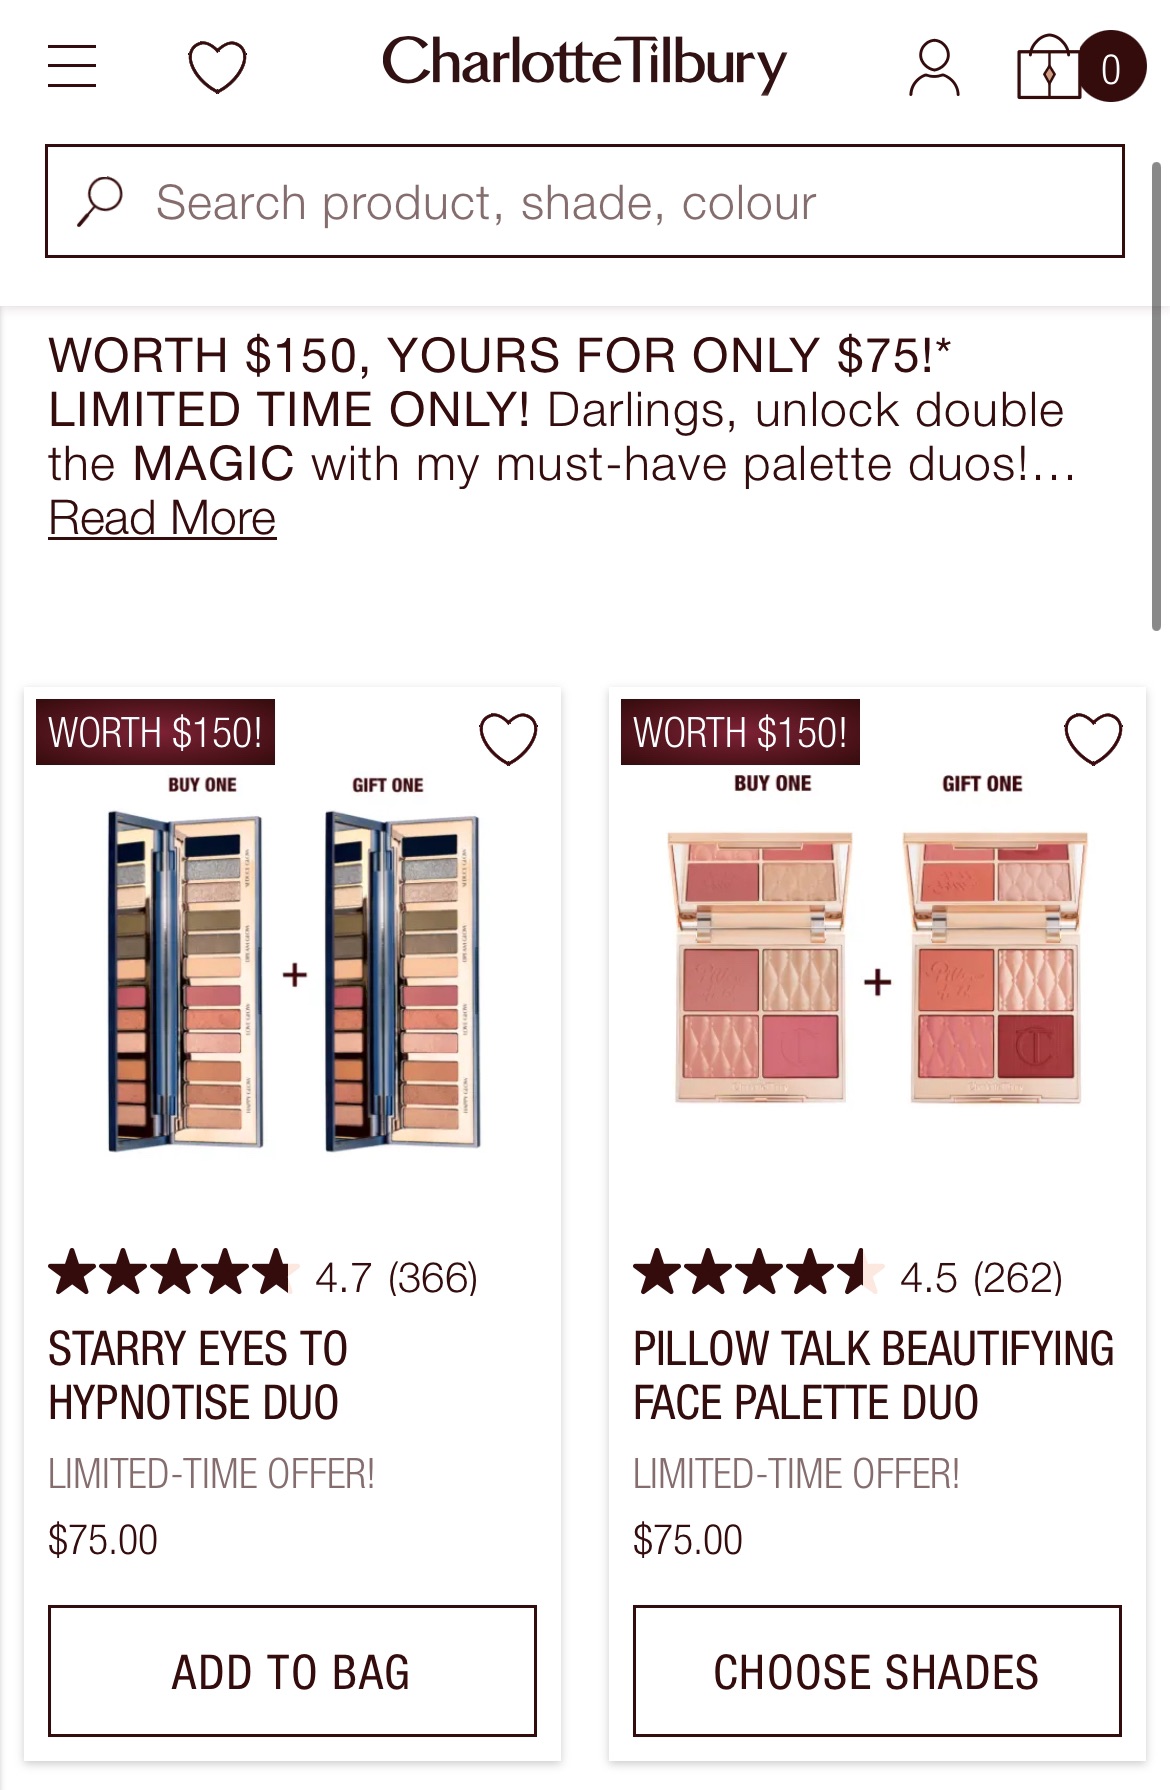 Charlotte Tilbury Cosmetics: 15% Off Your First Order & Free Shipping | Charlotte Tilbury